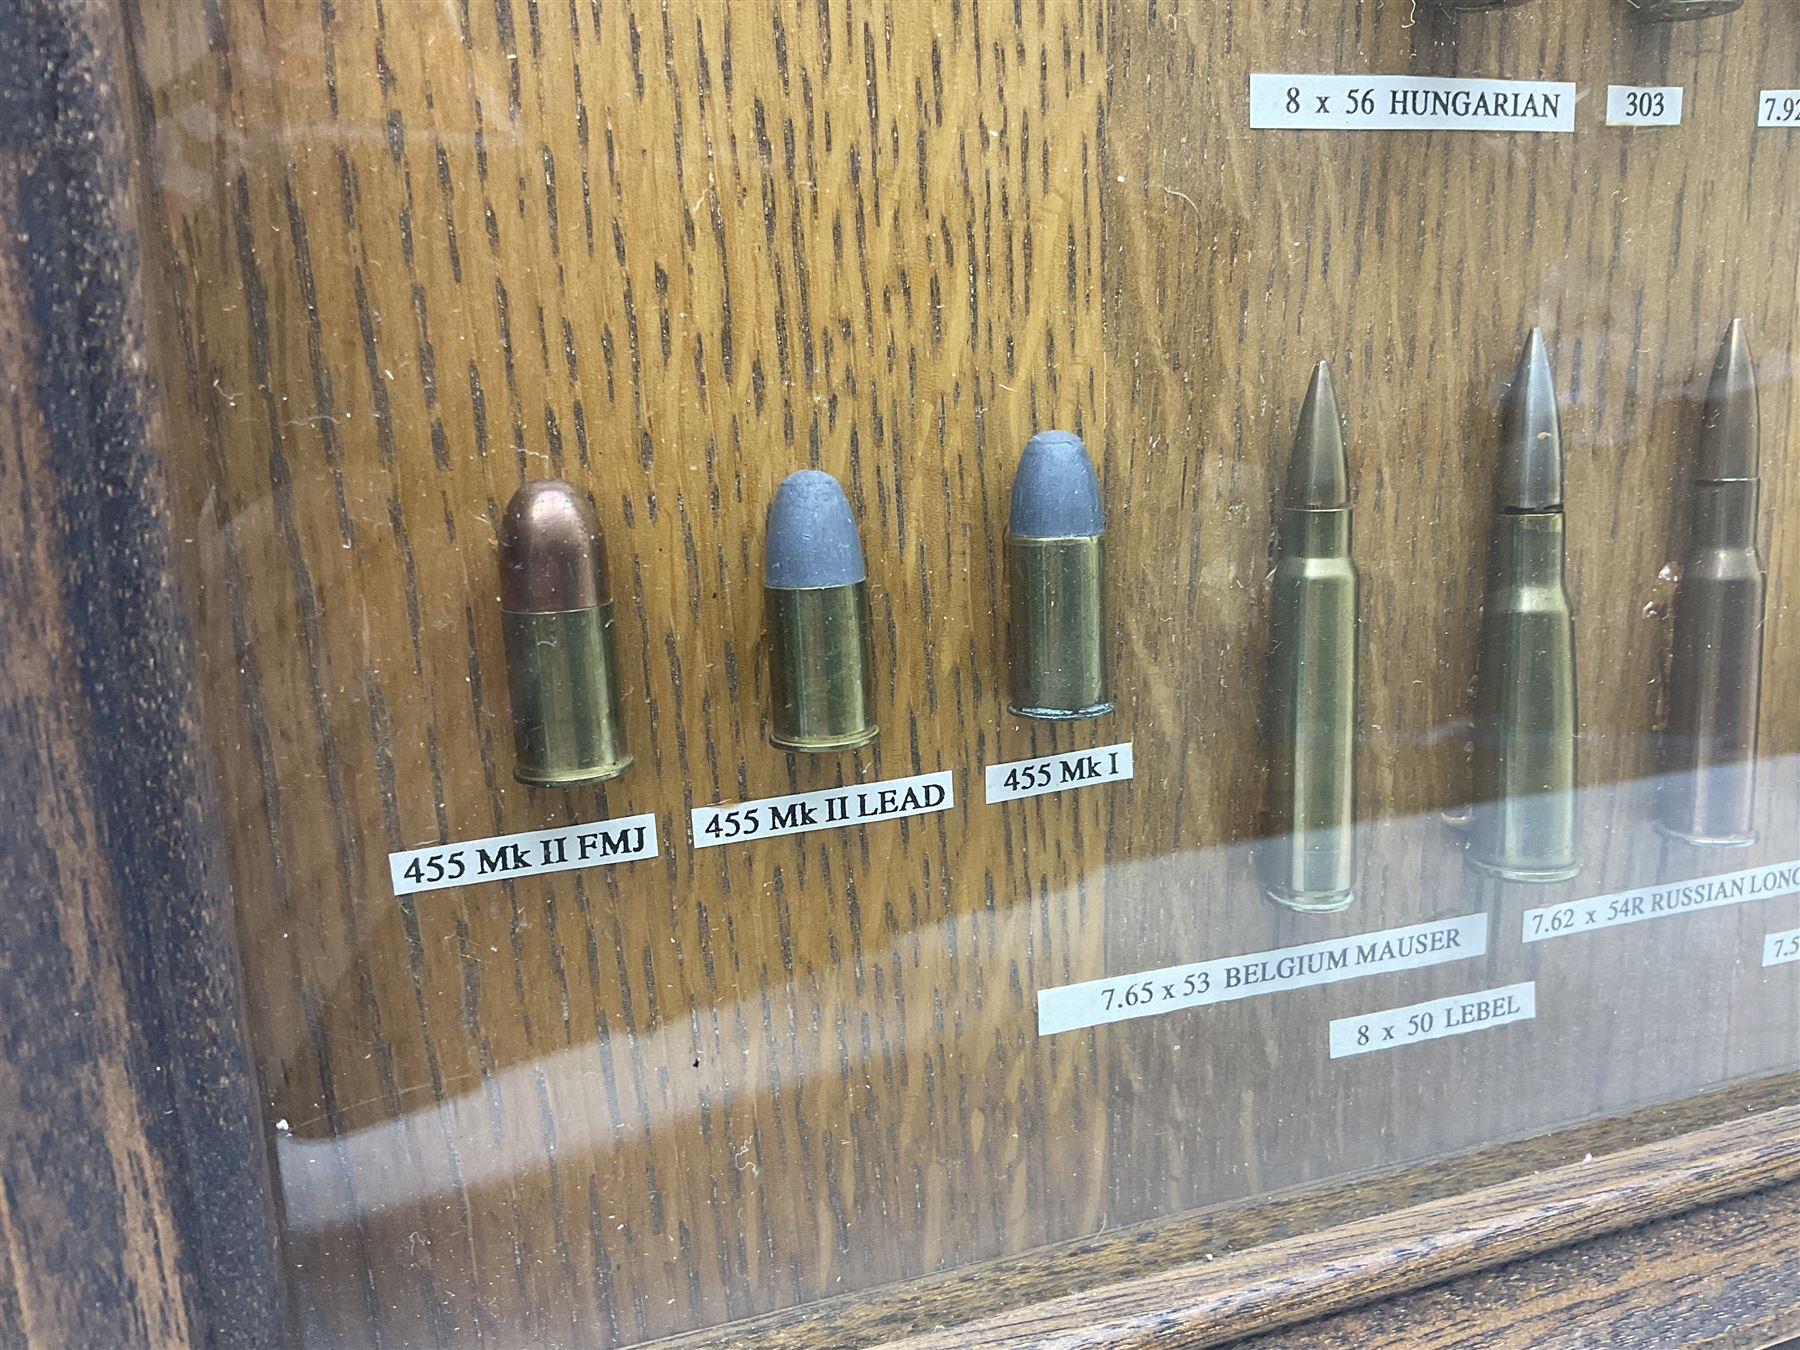 SECTION 1 FIRE-ARMS CERTIFICATE REQUIRED - Two cased specimen displays of annotated ammunition/cartr - Image 13 of 15